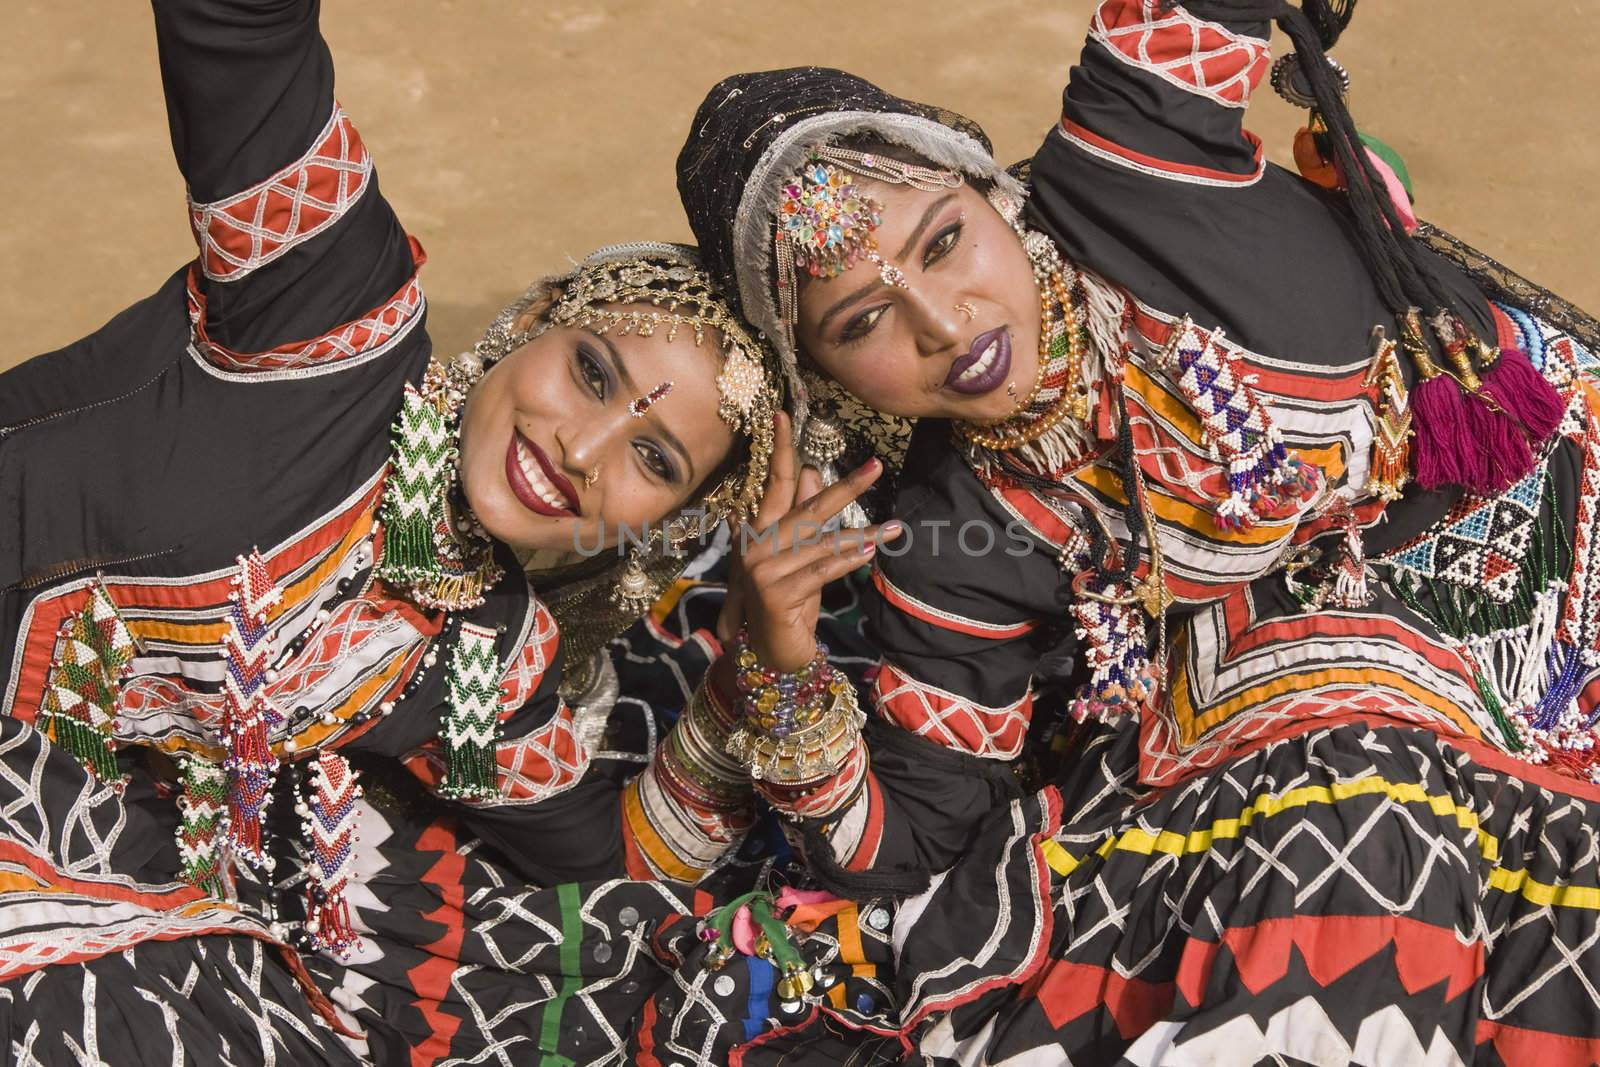 Beautiful Kalbelia dancers in ornate black costumes trimmed with beads and sequins at the annual Sarujkund Fair near Delhi, India.